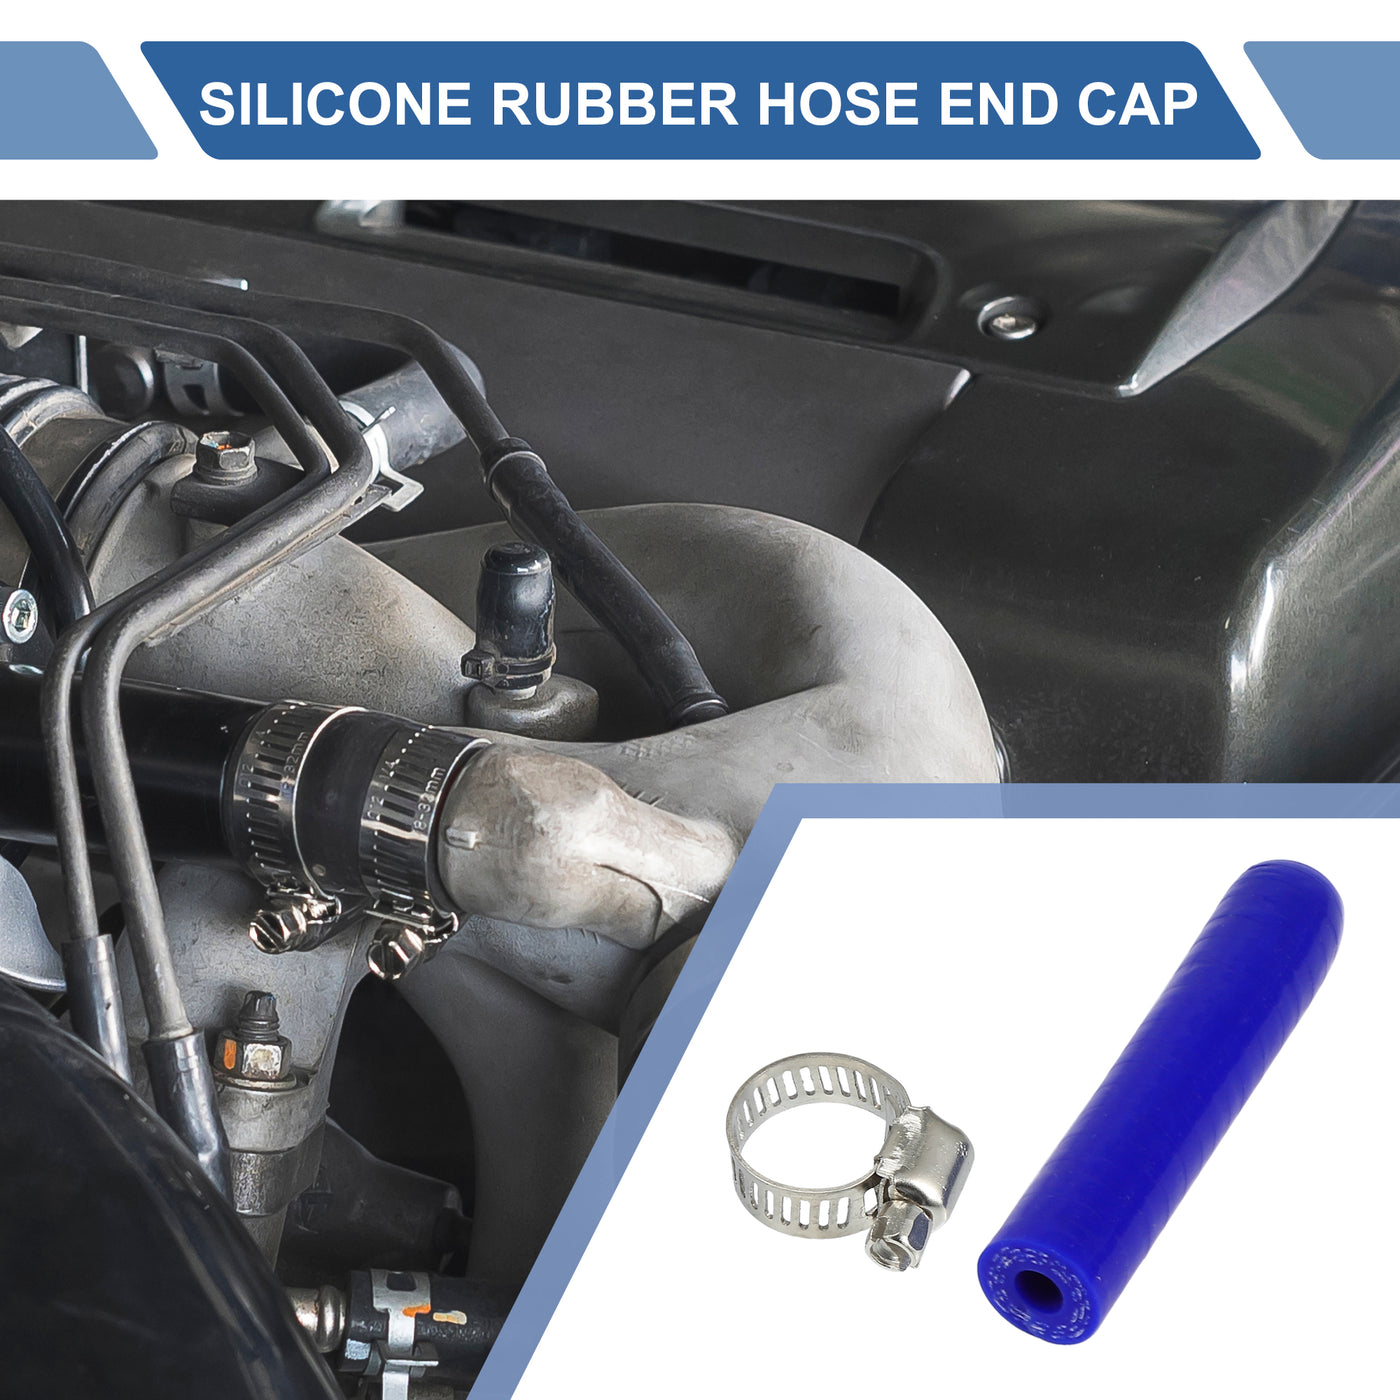 X AUTOHAUX 1 Pcs 60mm Length 6mm/0.24" ID Blue Car Silicone Rubber Hose End Cap with Clamp Silicone Reinforced Blanking Cap for Bypass Tube Universal